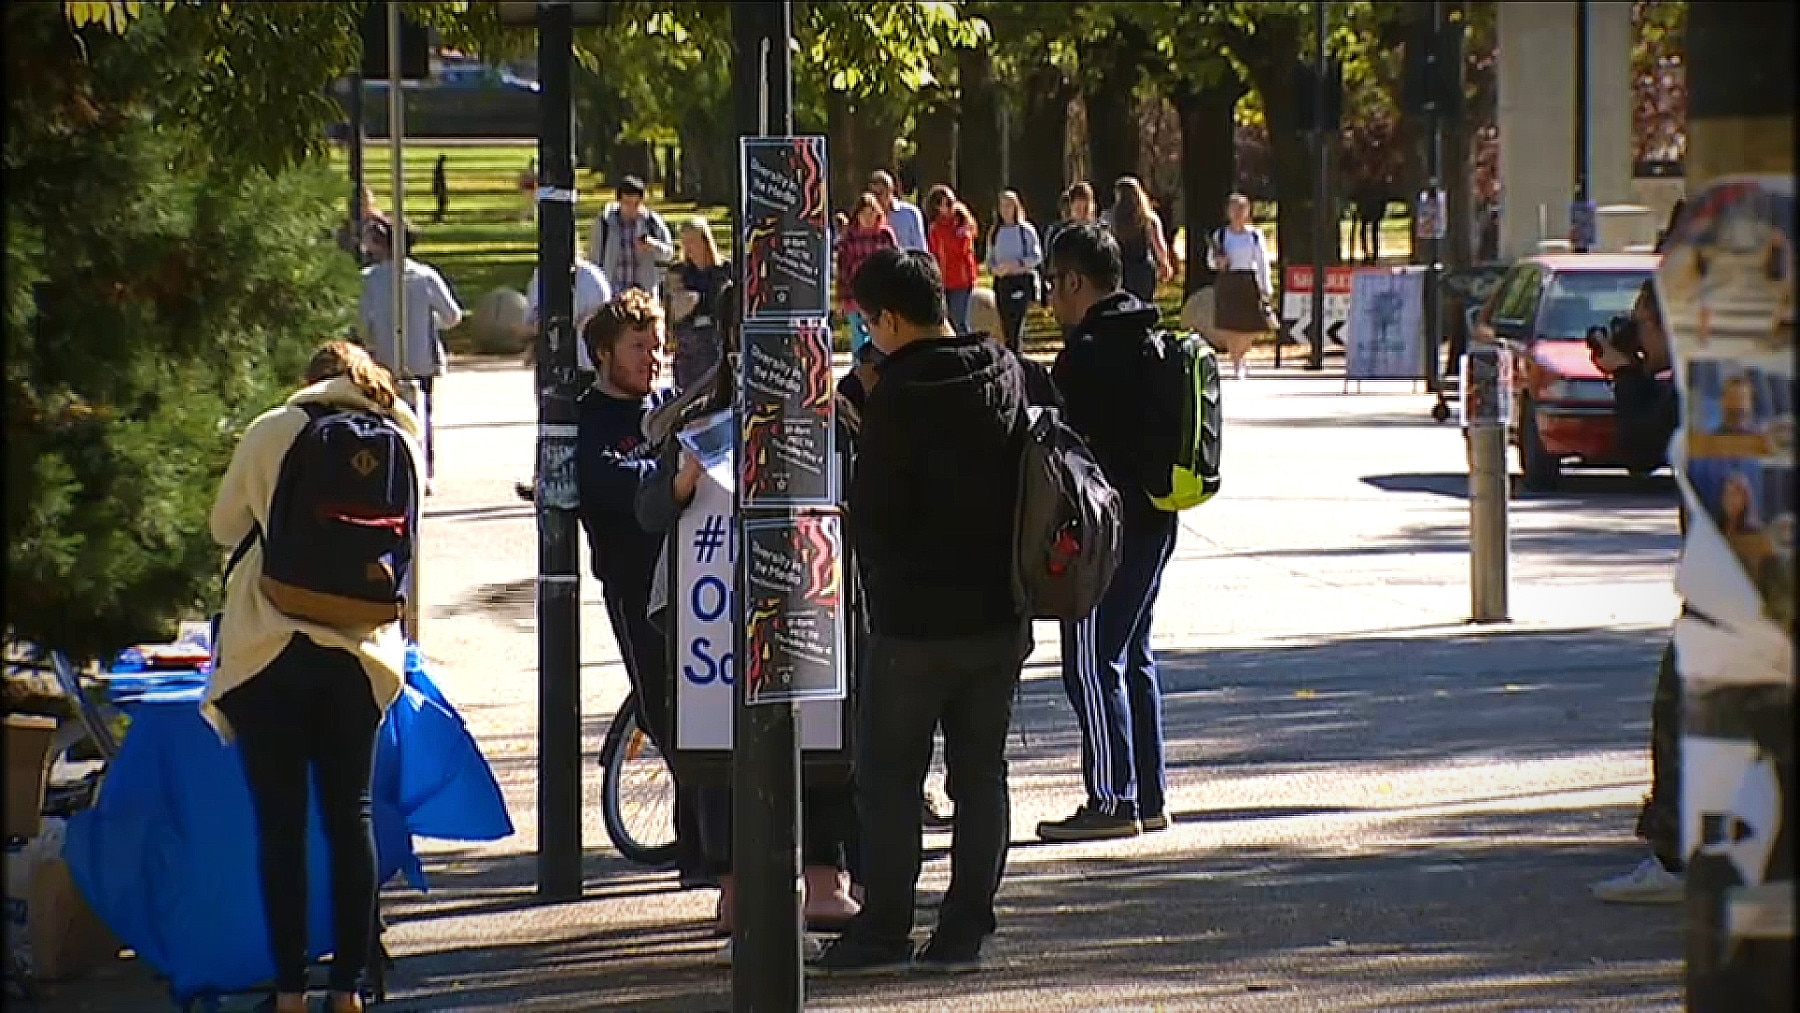 Students at Australian National University in Canberra, pre-COVID (SBS)